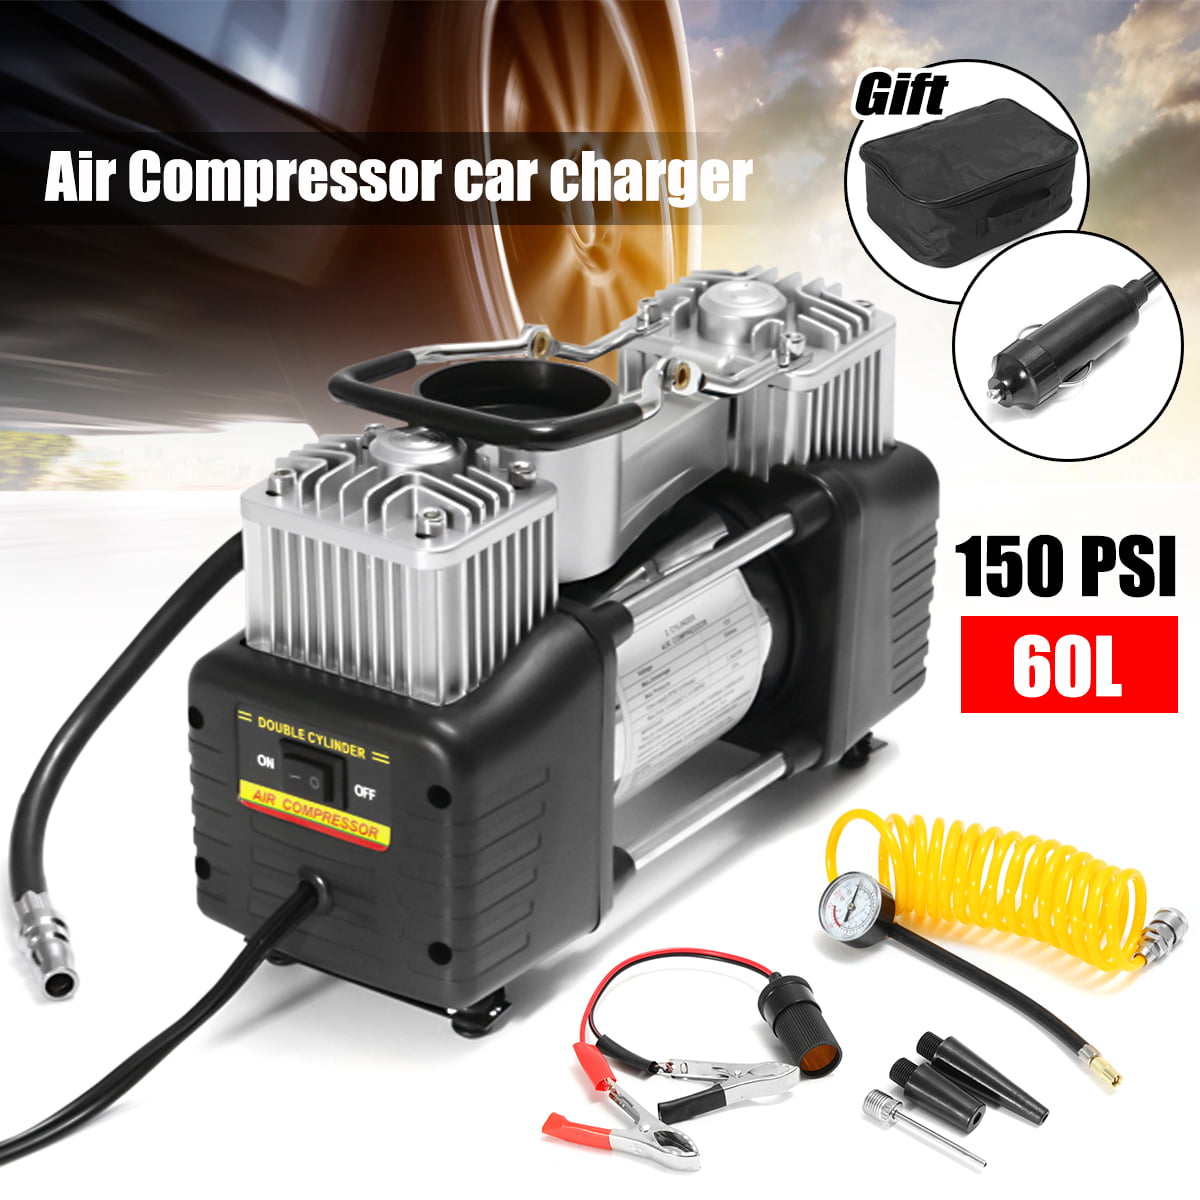 30L/Min Motorcycles SUAOKI Air Compressor Pump 150 PSI 12V DC Portable Tire Inflator with Gauge and Emergency Light for Cars Bicycles and Basketballs